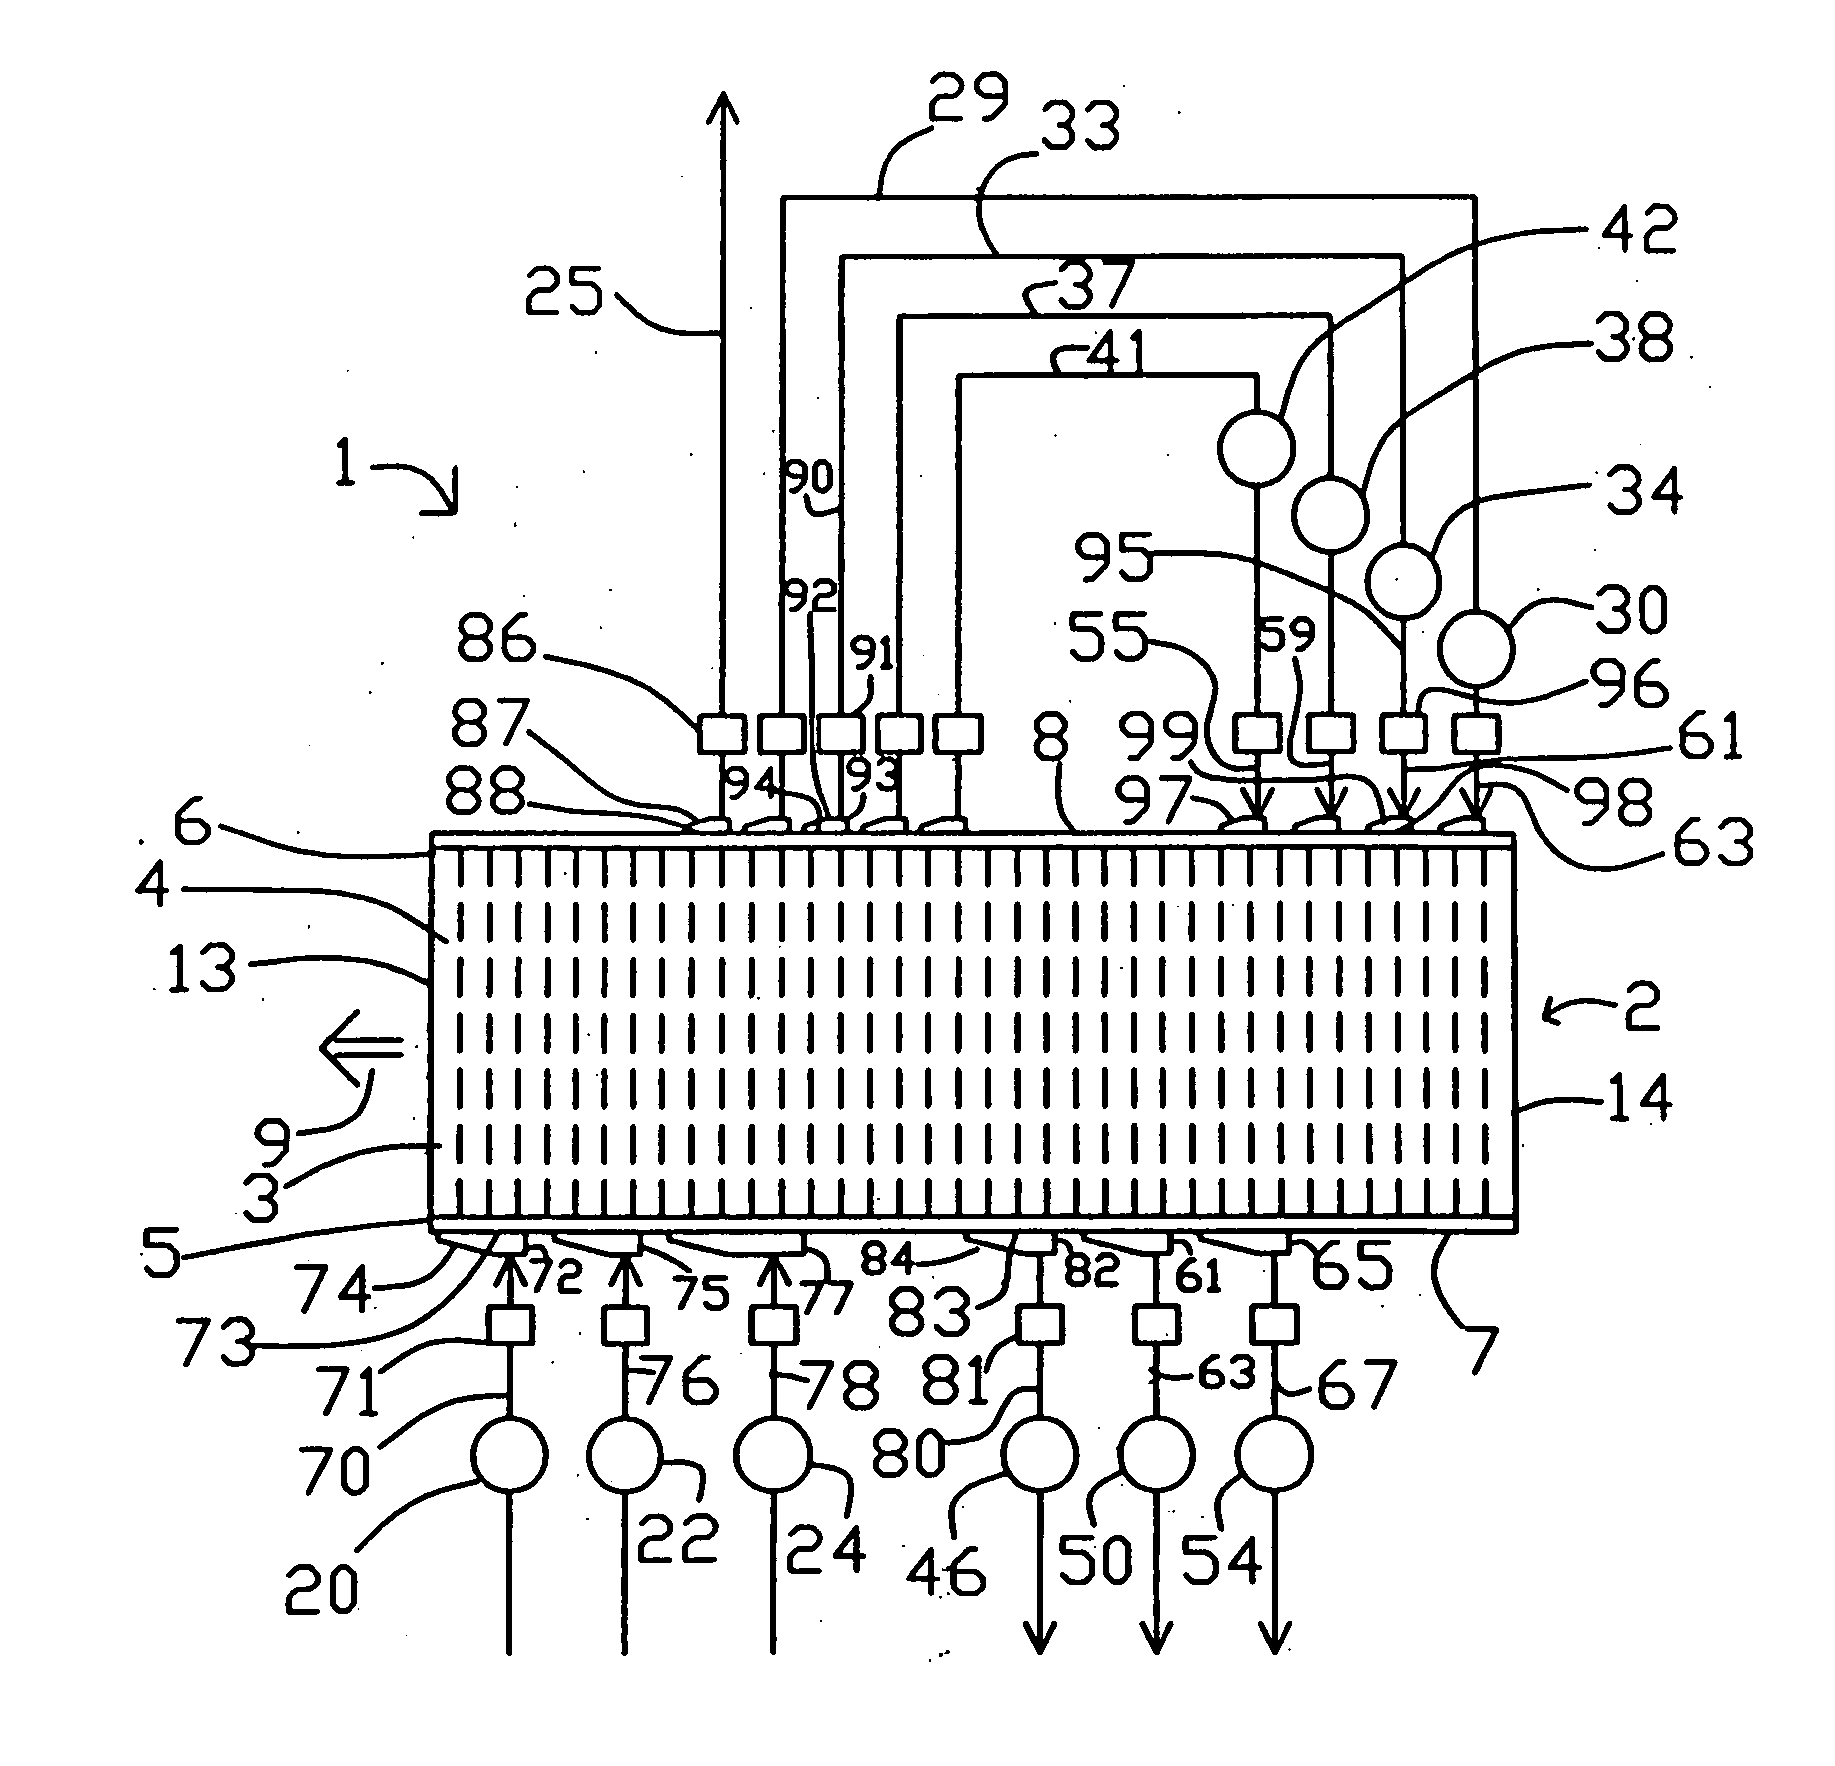 Chemical reactor with pressure swing adsorption